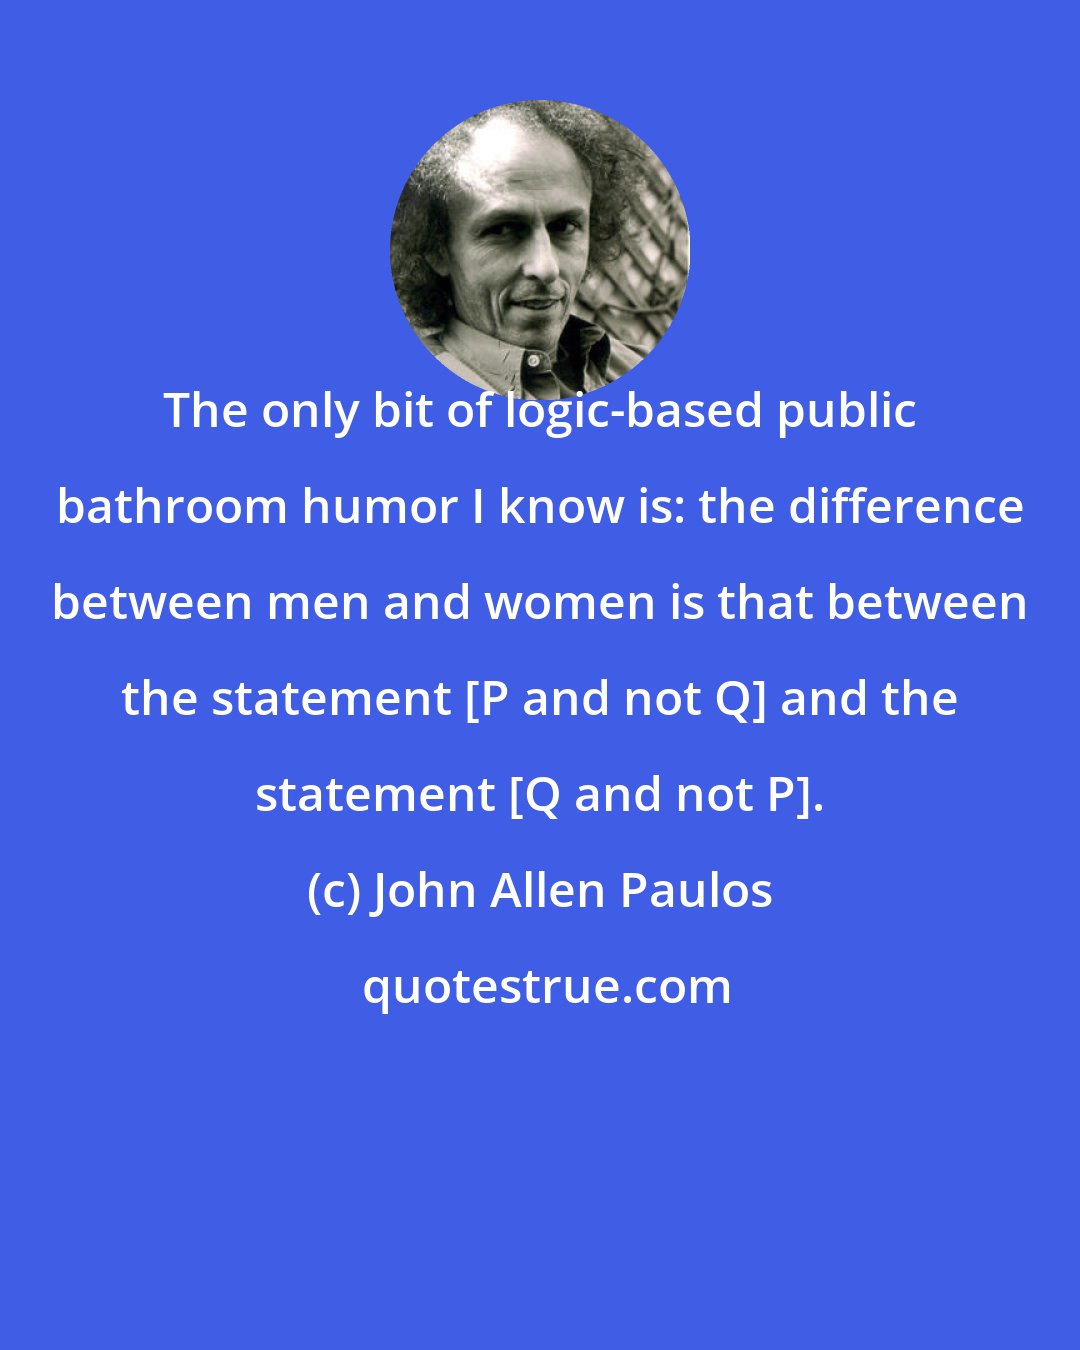 John Allen Paulos: The only bit of logic-based public bathroom humor I know is: the difference between men and women is that between the statement [P and not Q] and the statement [Q and not P].